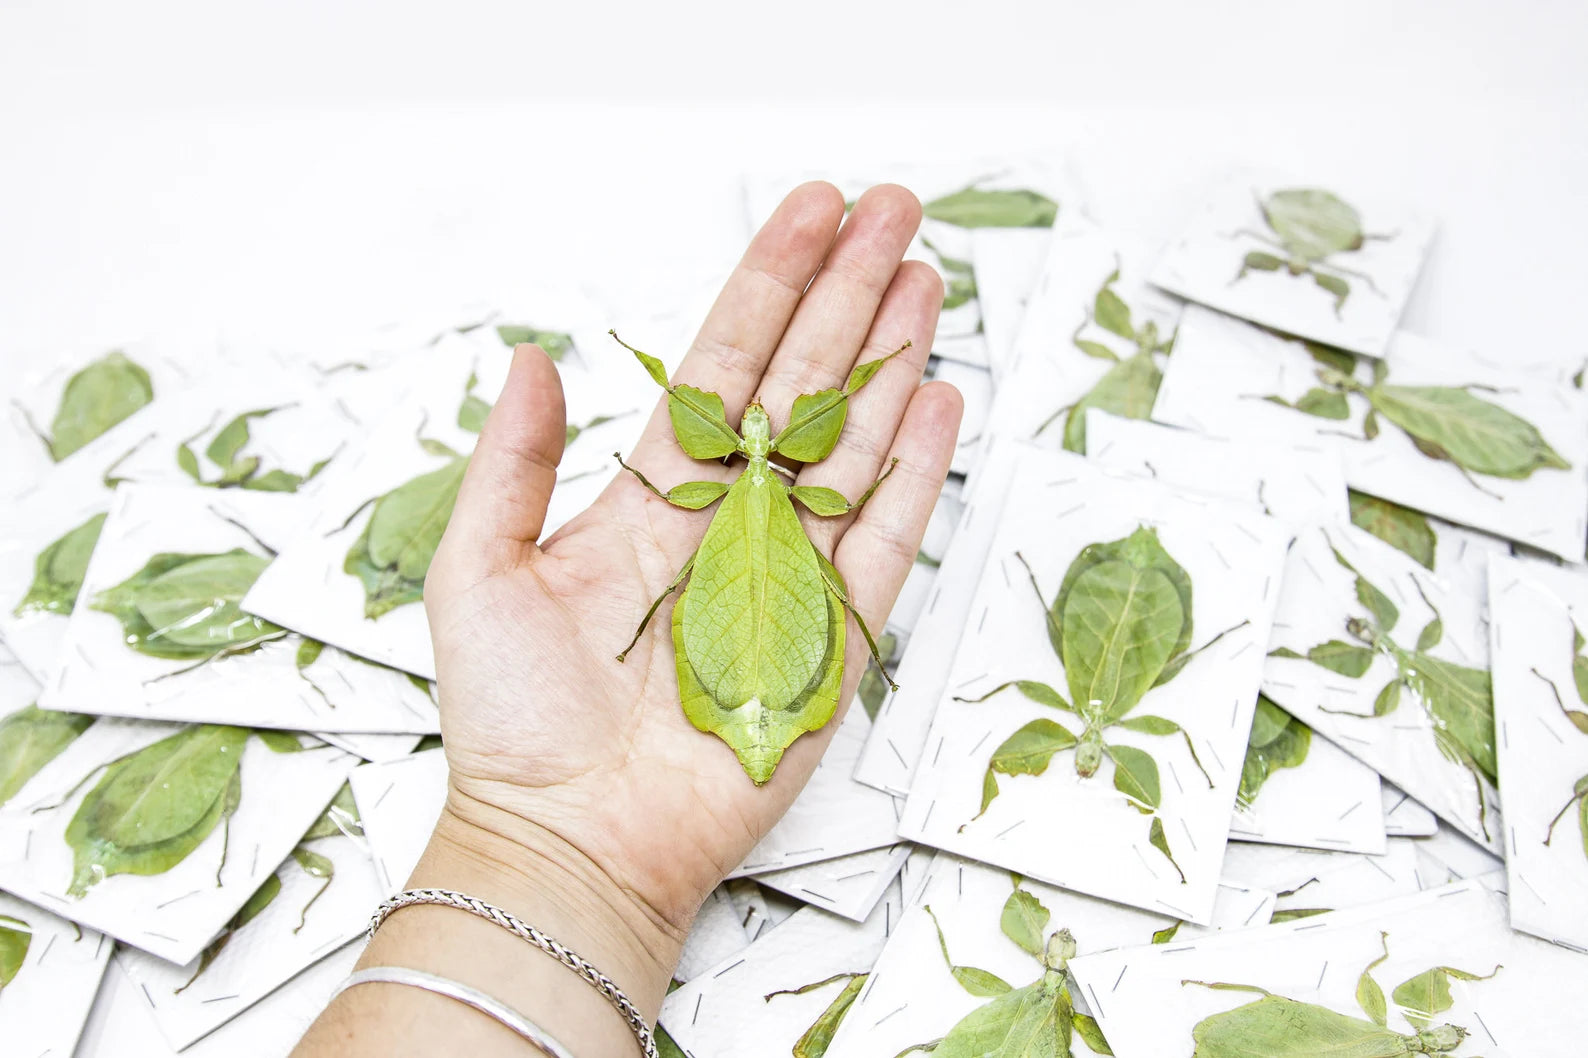 WHOLESALE 10 Giant Leaf Insects A1, Phyllium celebicum, Spread Insect Specimens for Collecting, Art, Entomology